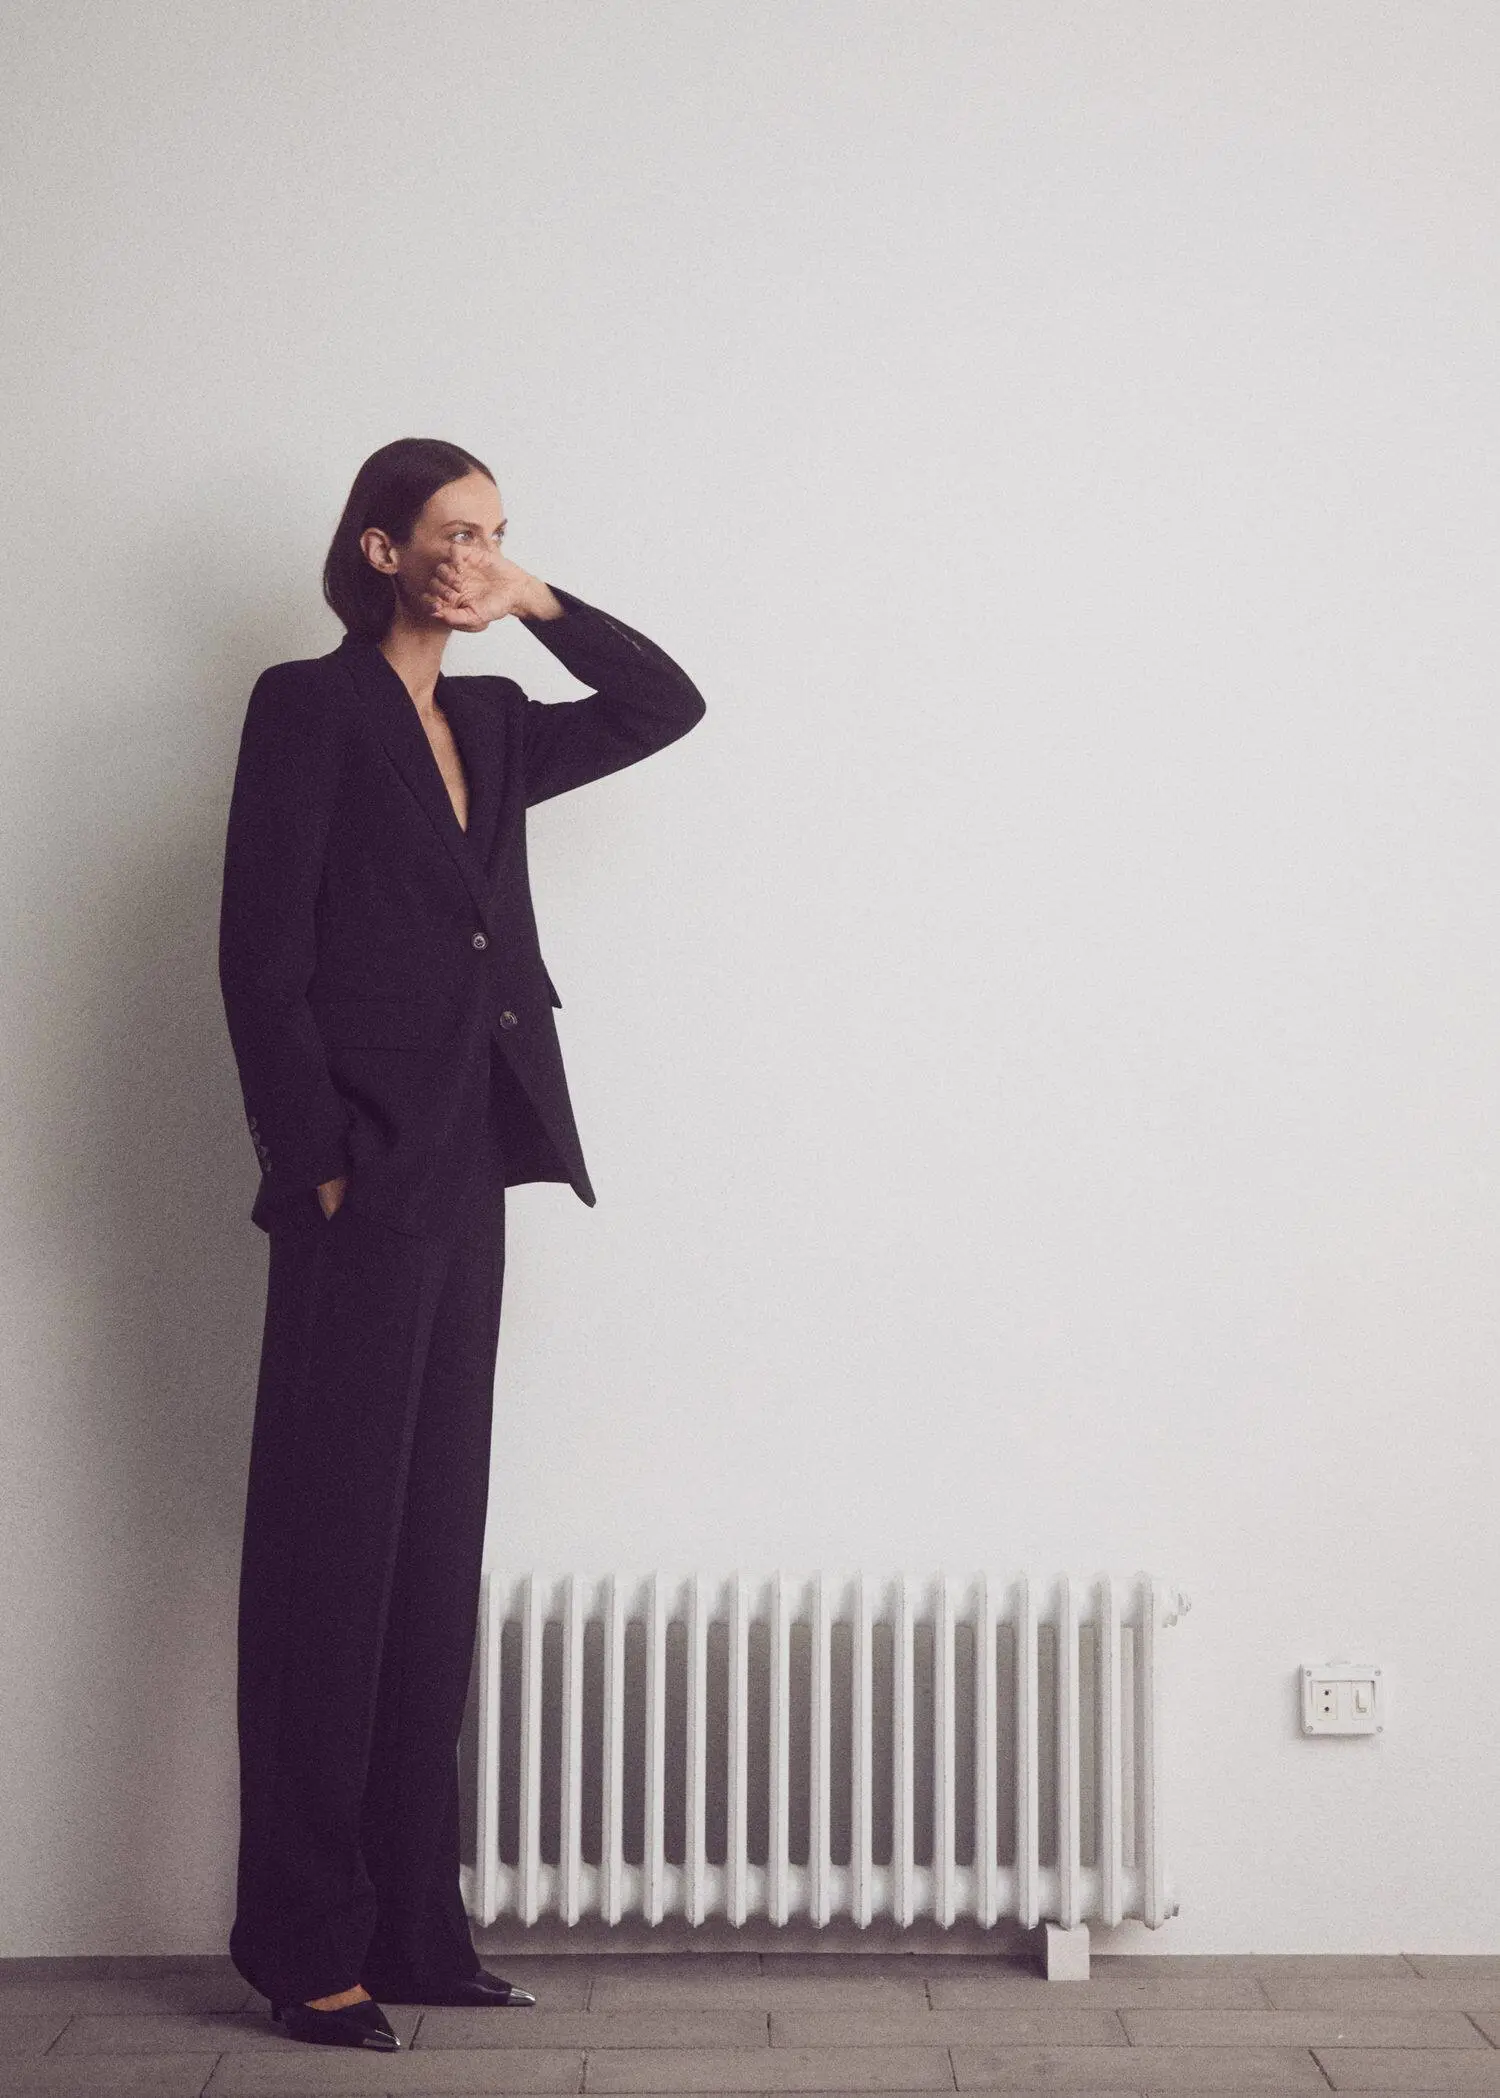 Mango Suit jacket with buttons. a woman standing in front of a radiator. 